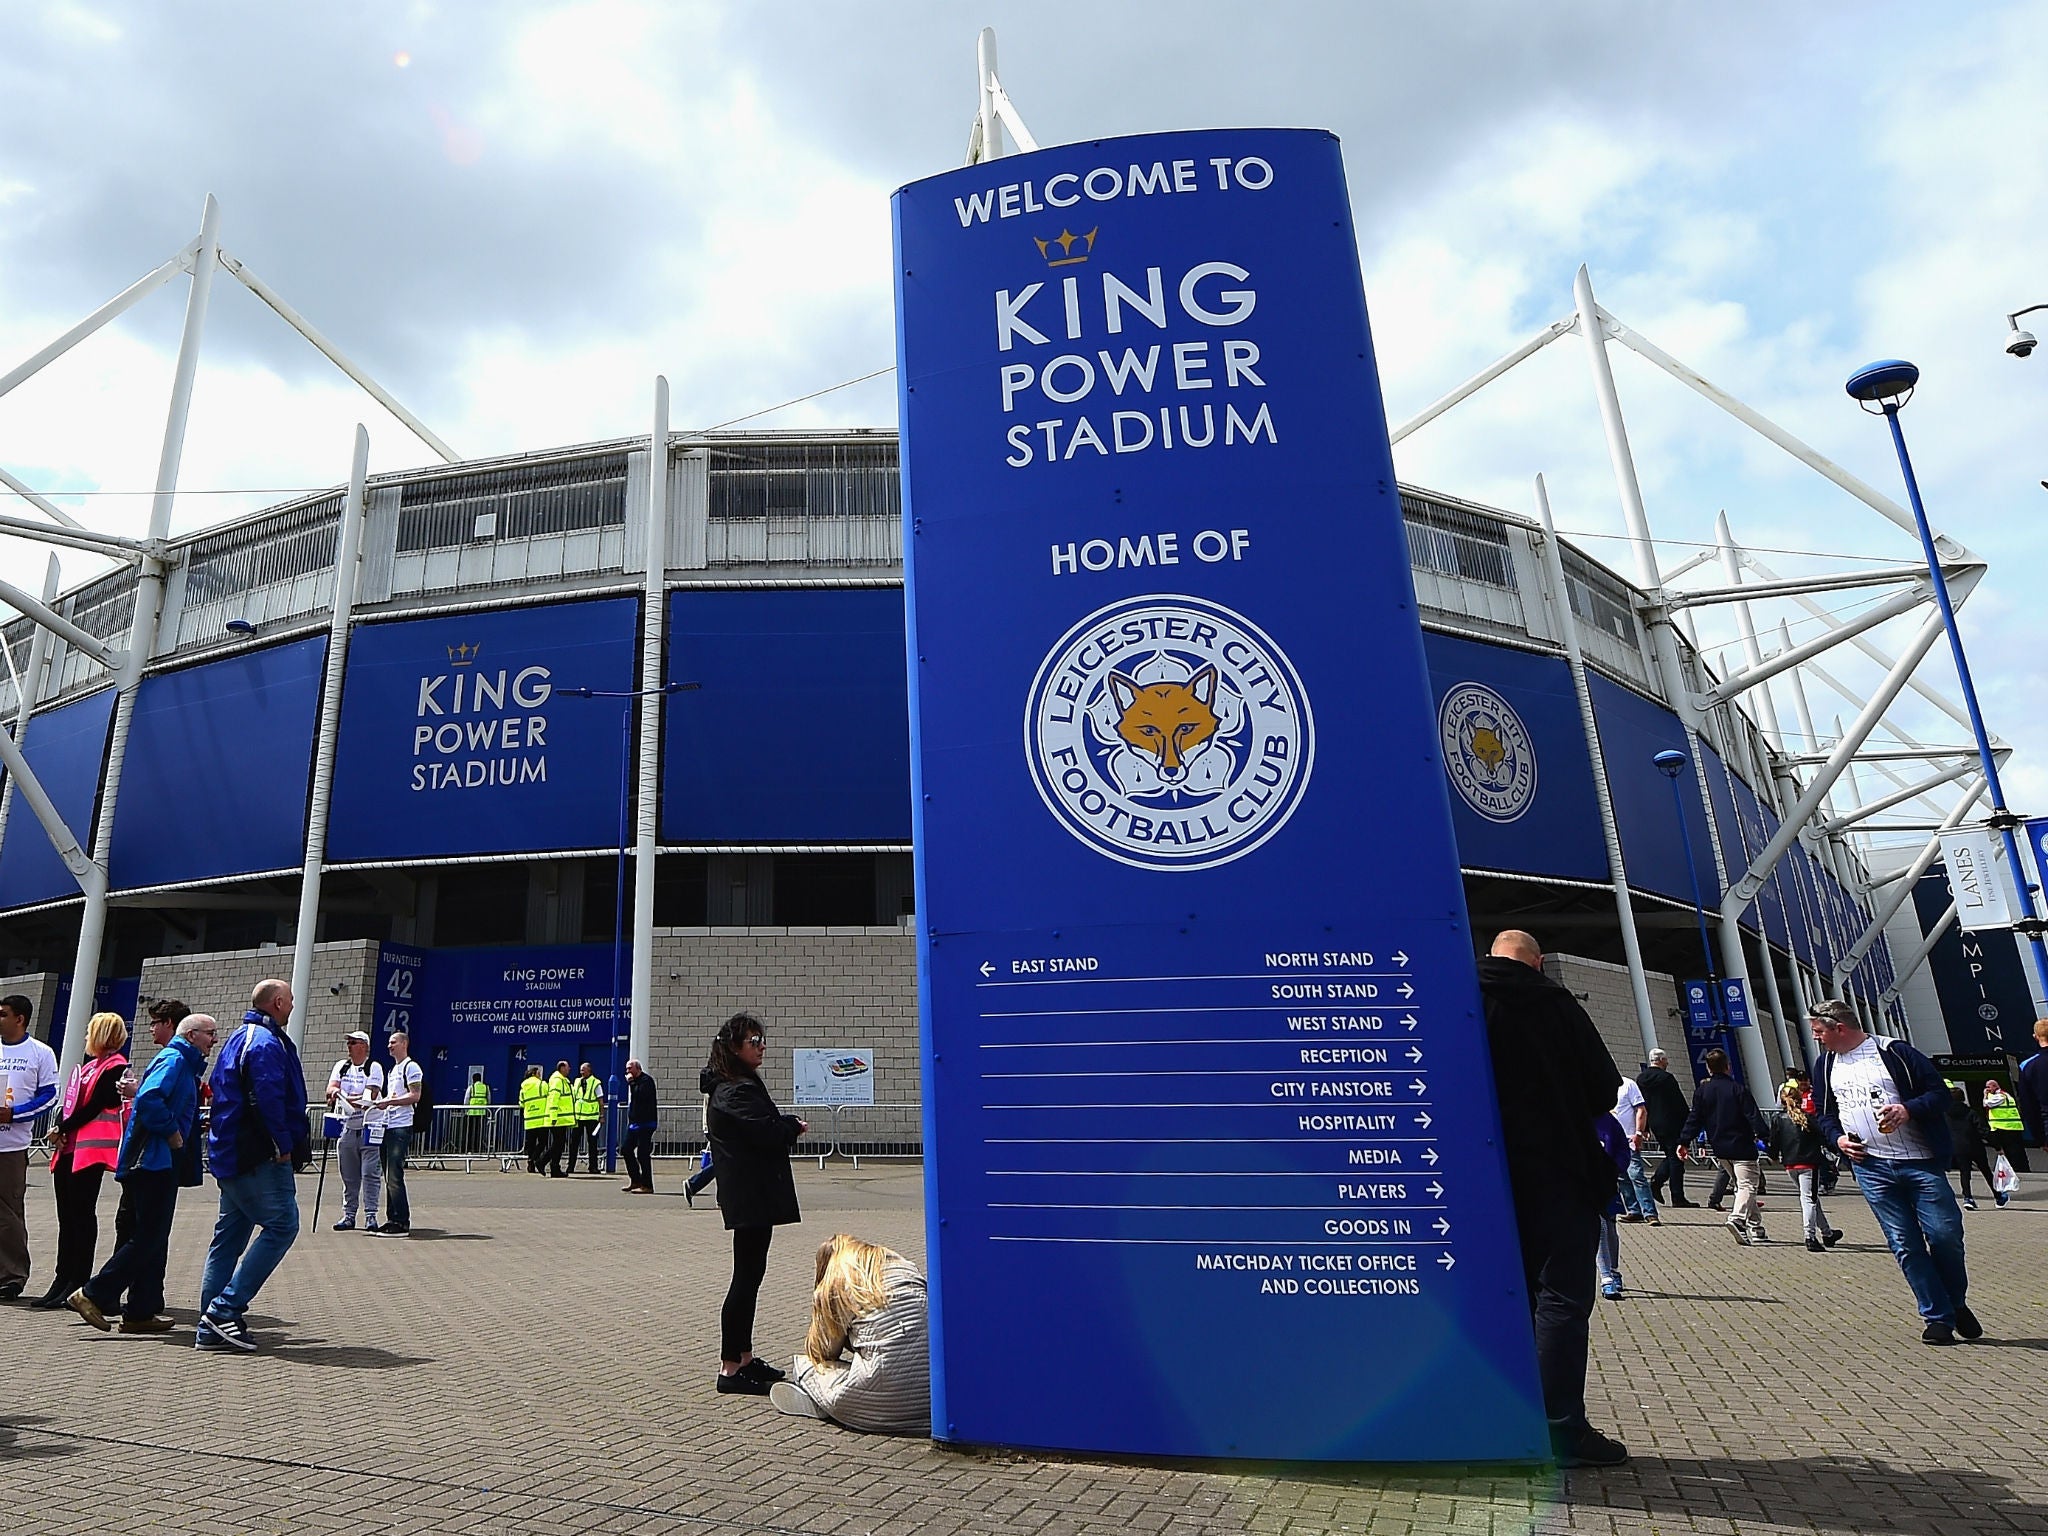 Vichai Srivaddhanaprabha bought Leicester City in 2010